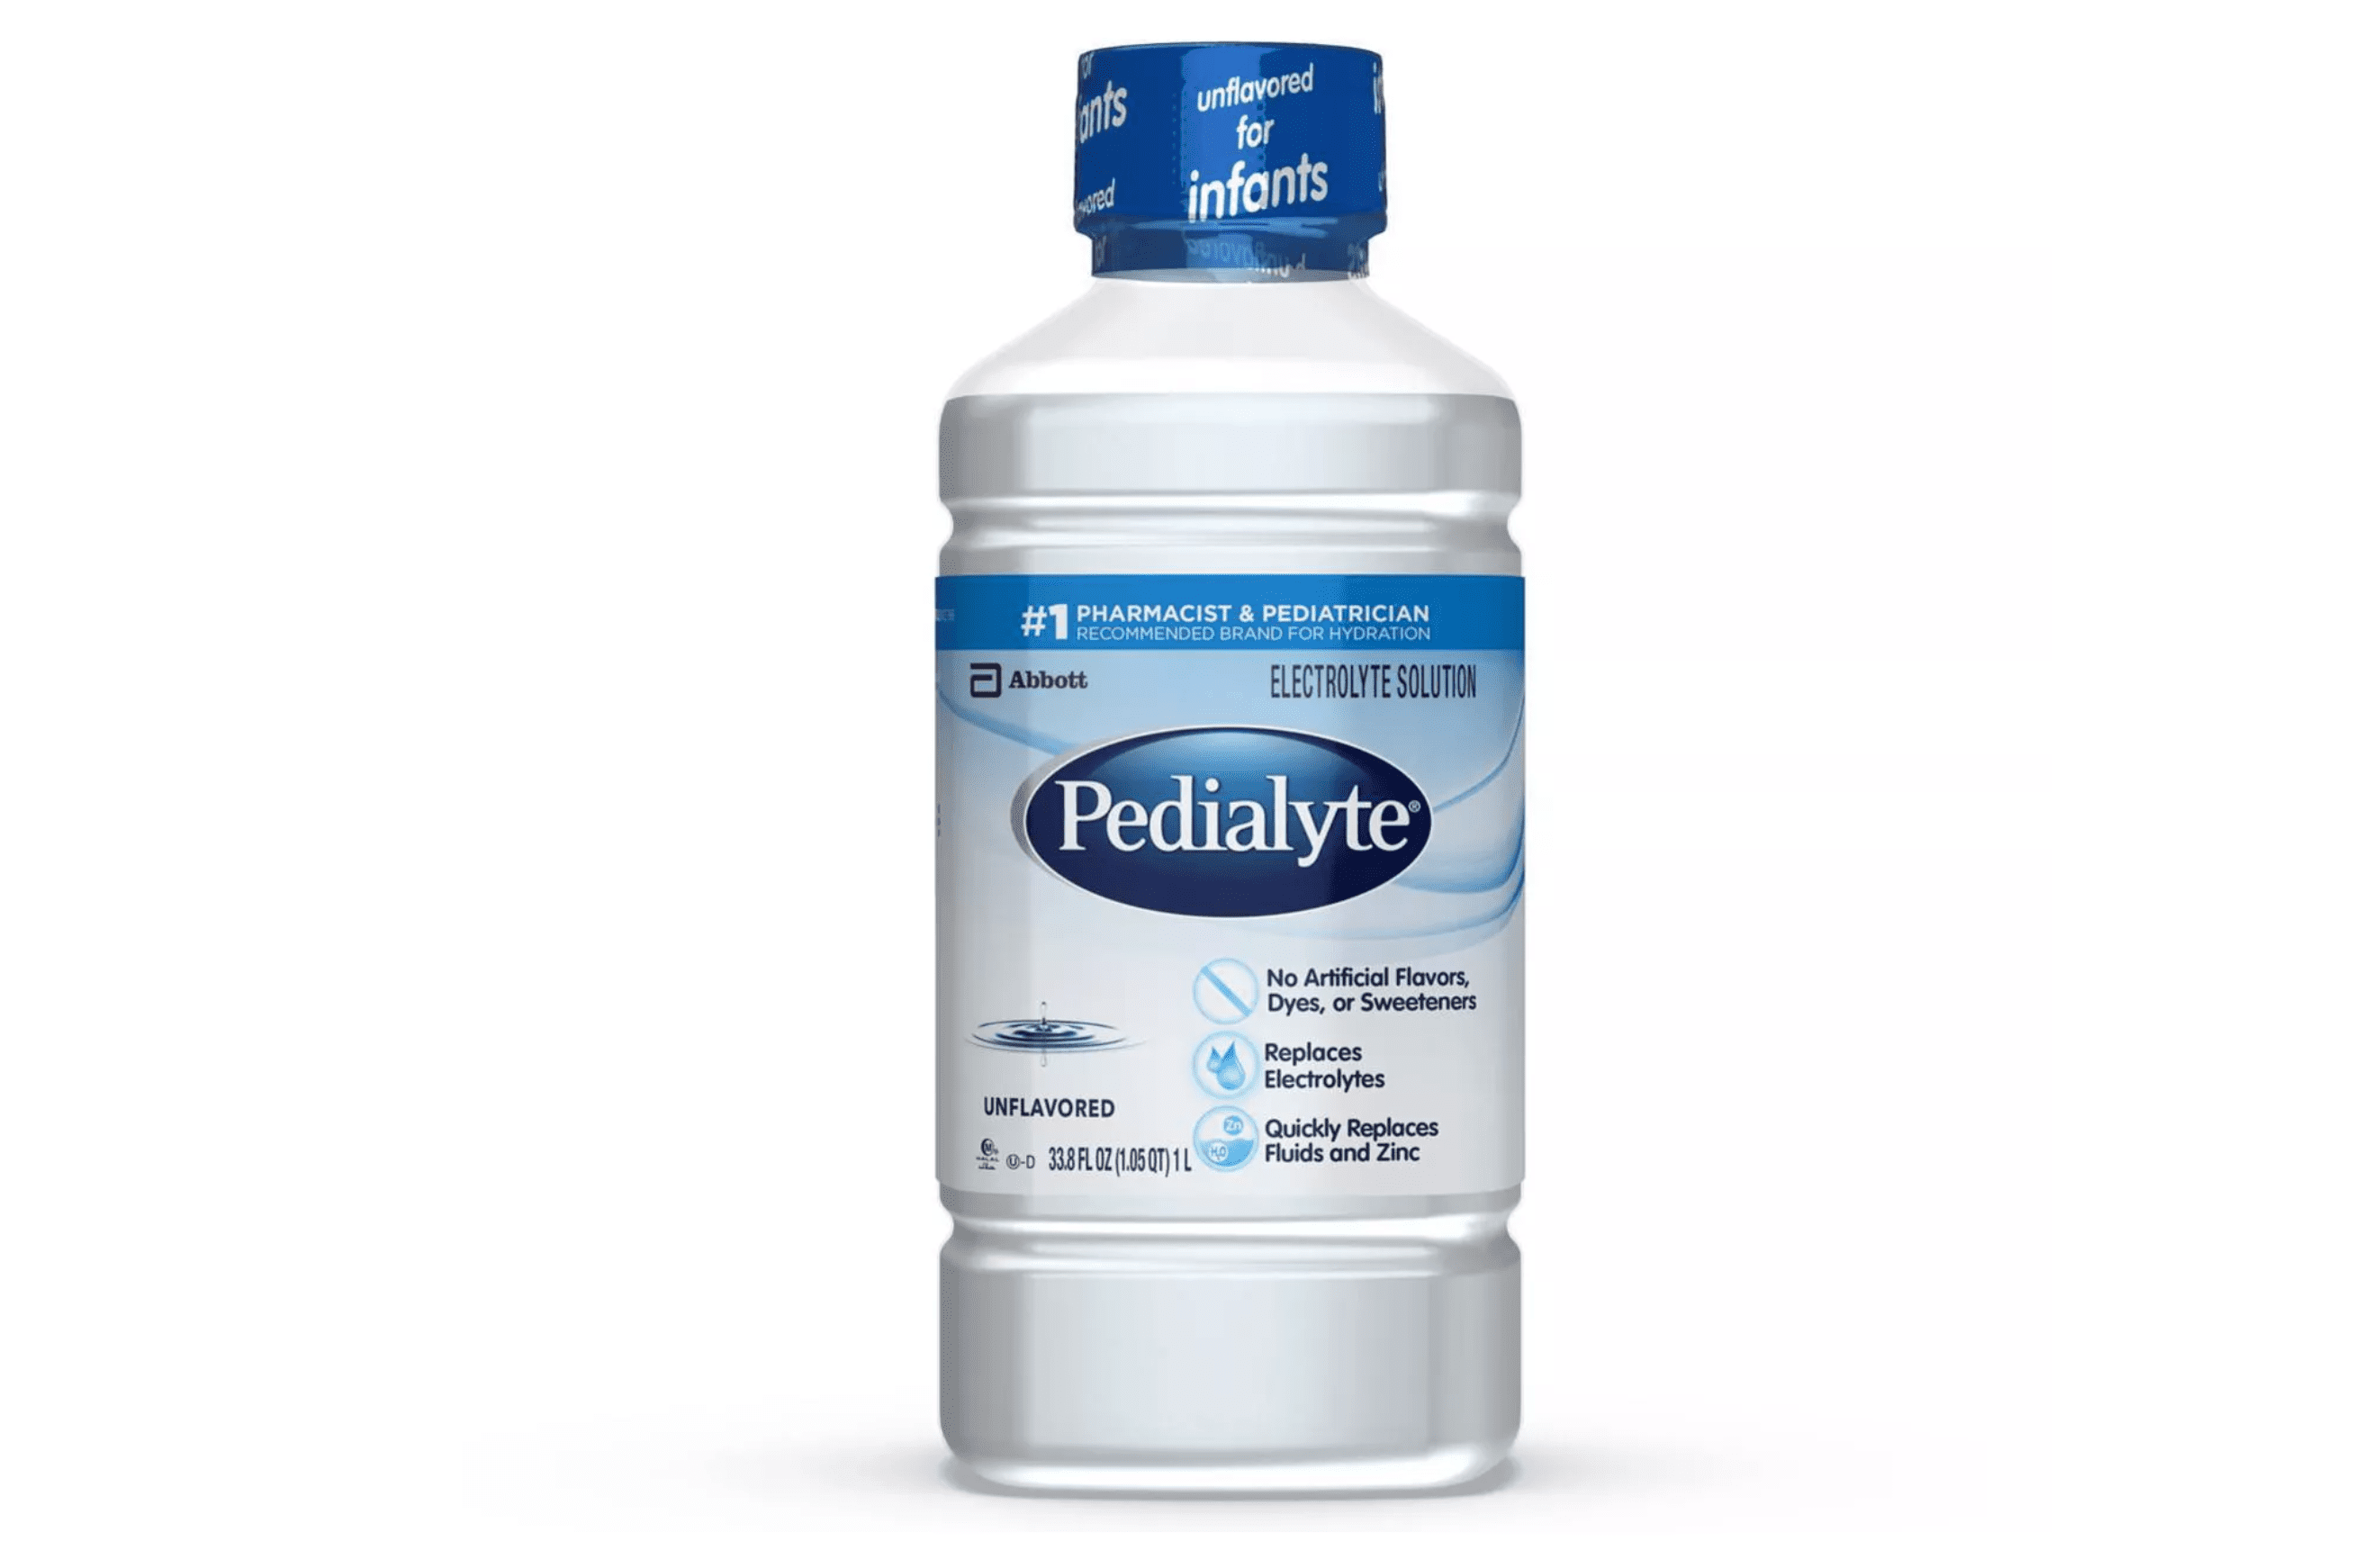 pedialyte-unflavored